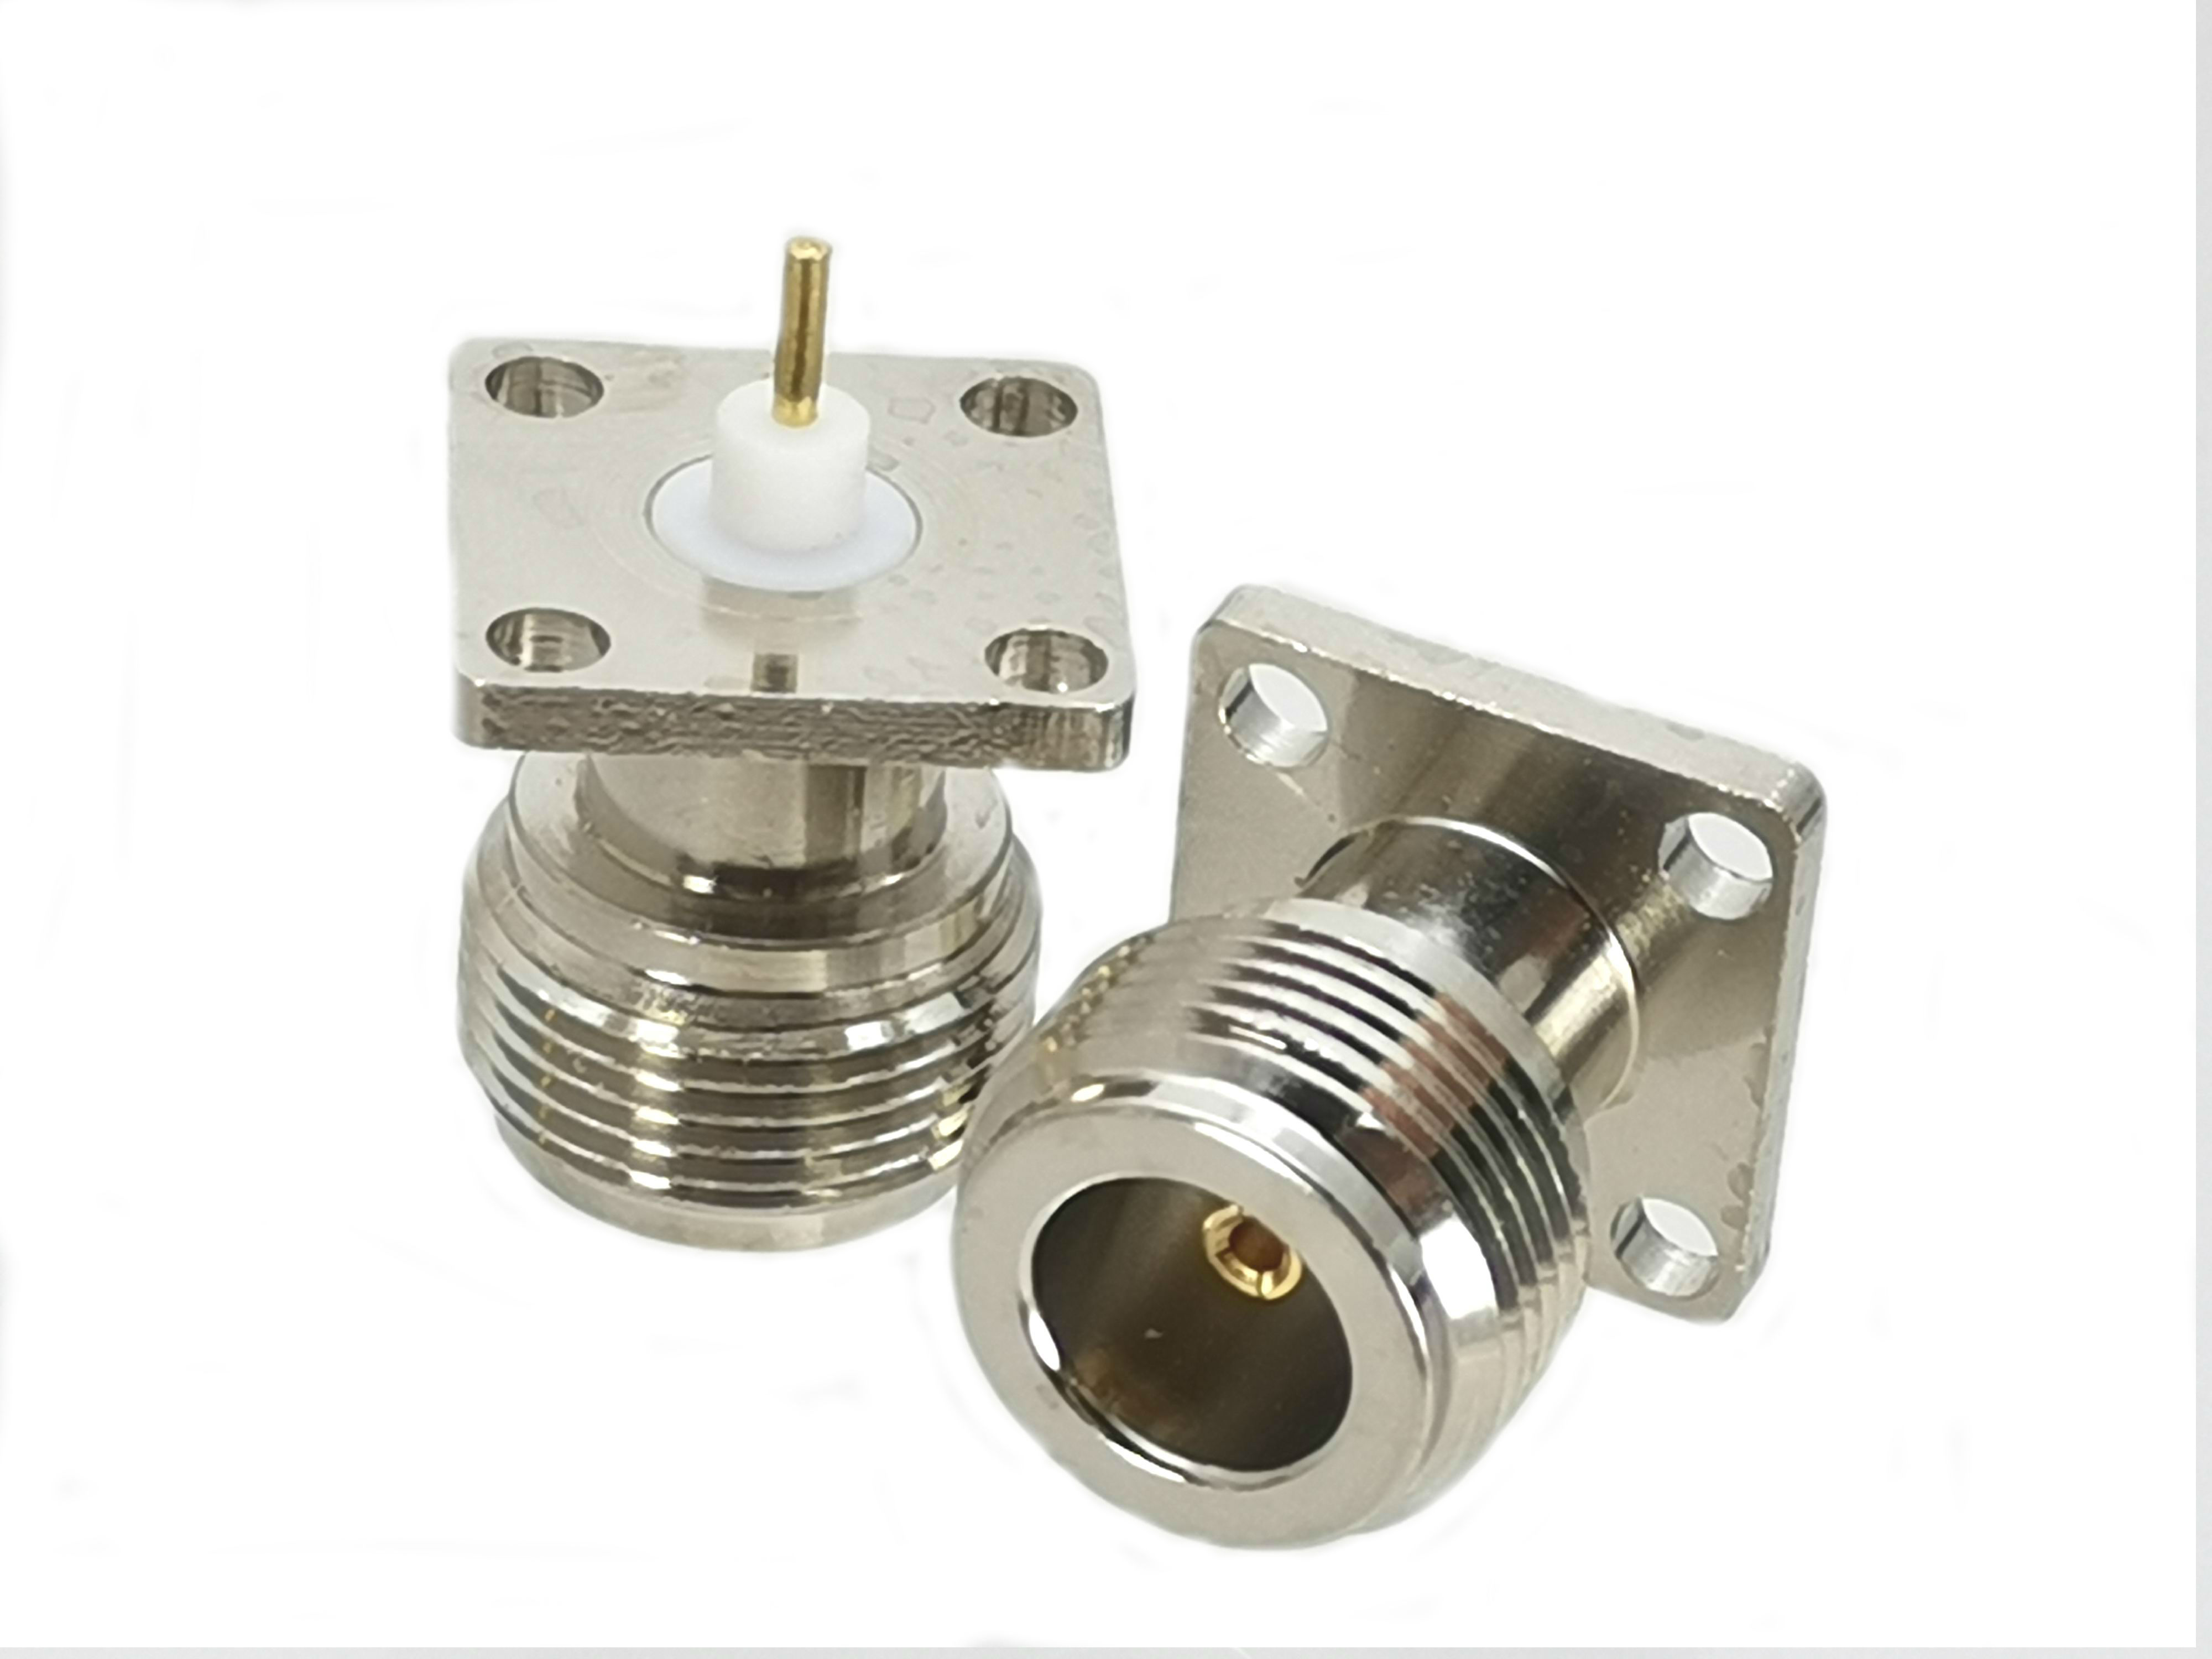 1Pcs N Female Jack 4-holes Flange PTFE Solder Pannel mount RF Adapter Connector Coaxial Straight High Quanlity